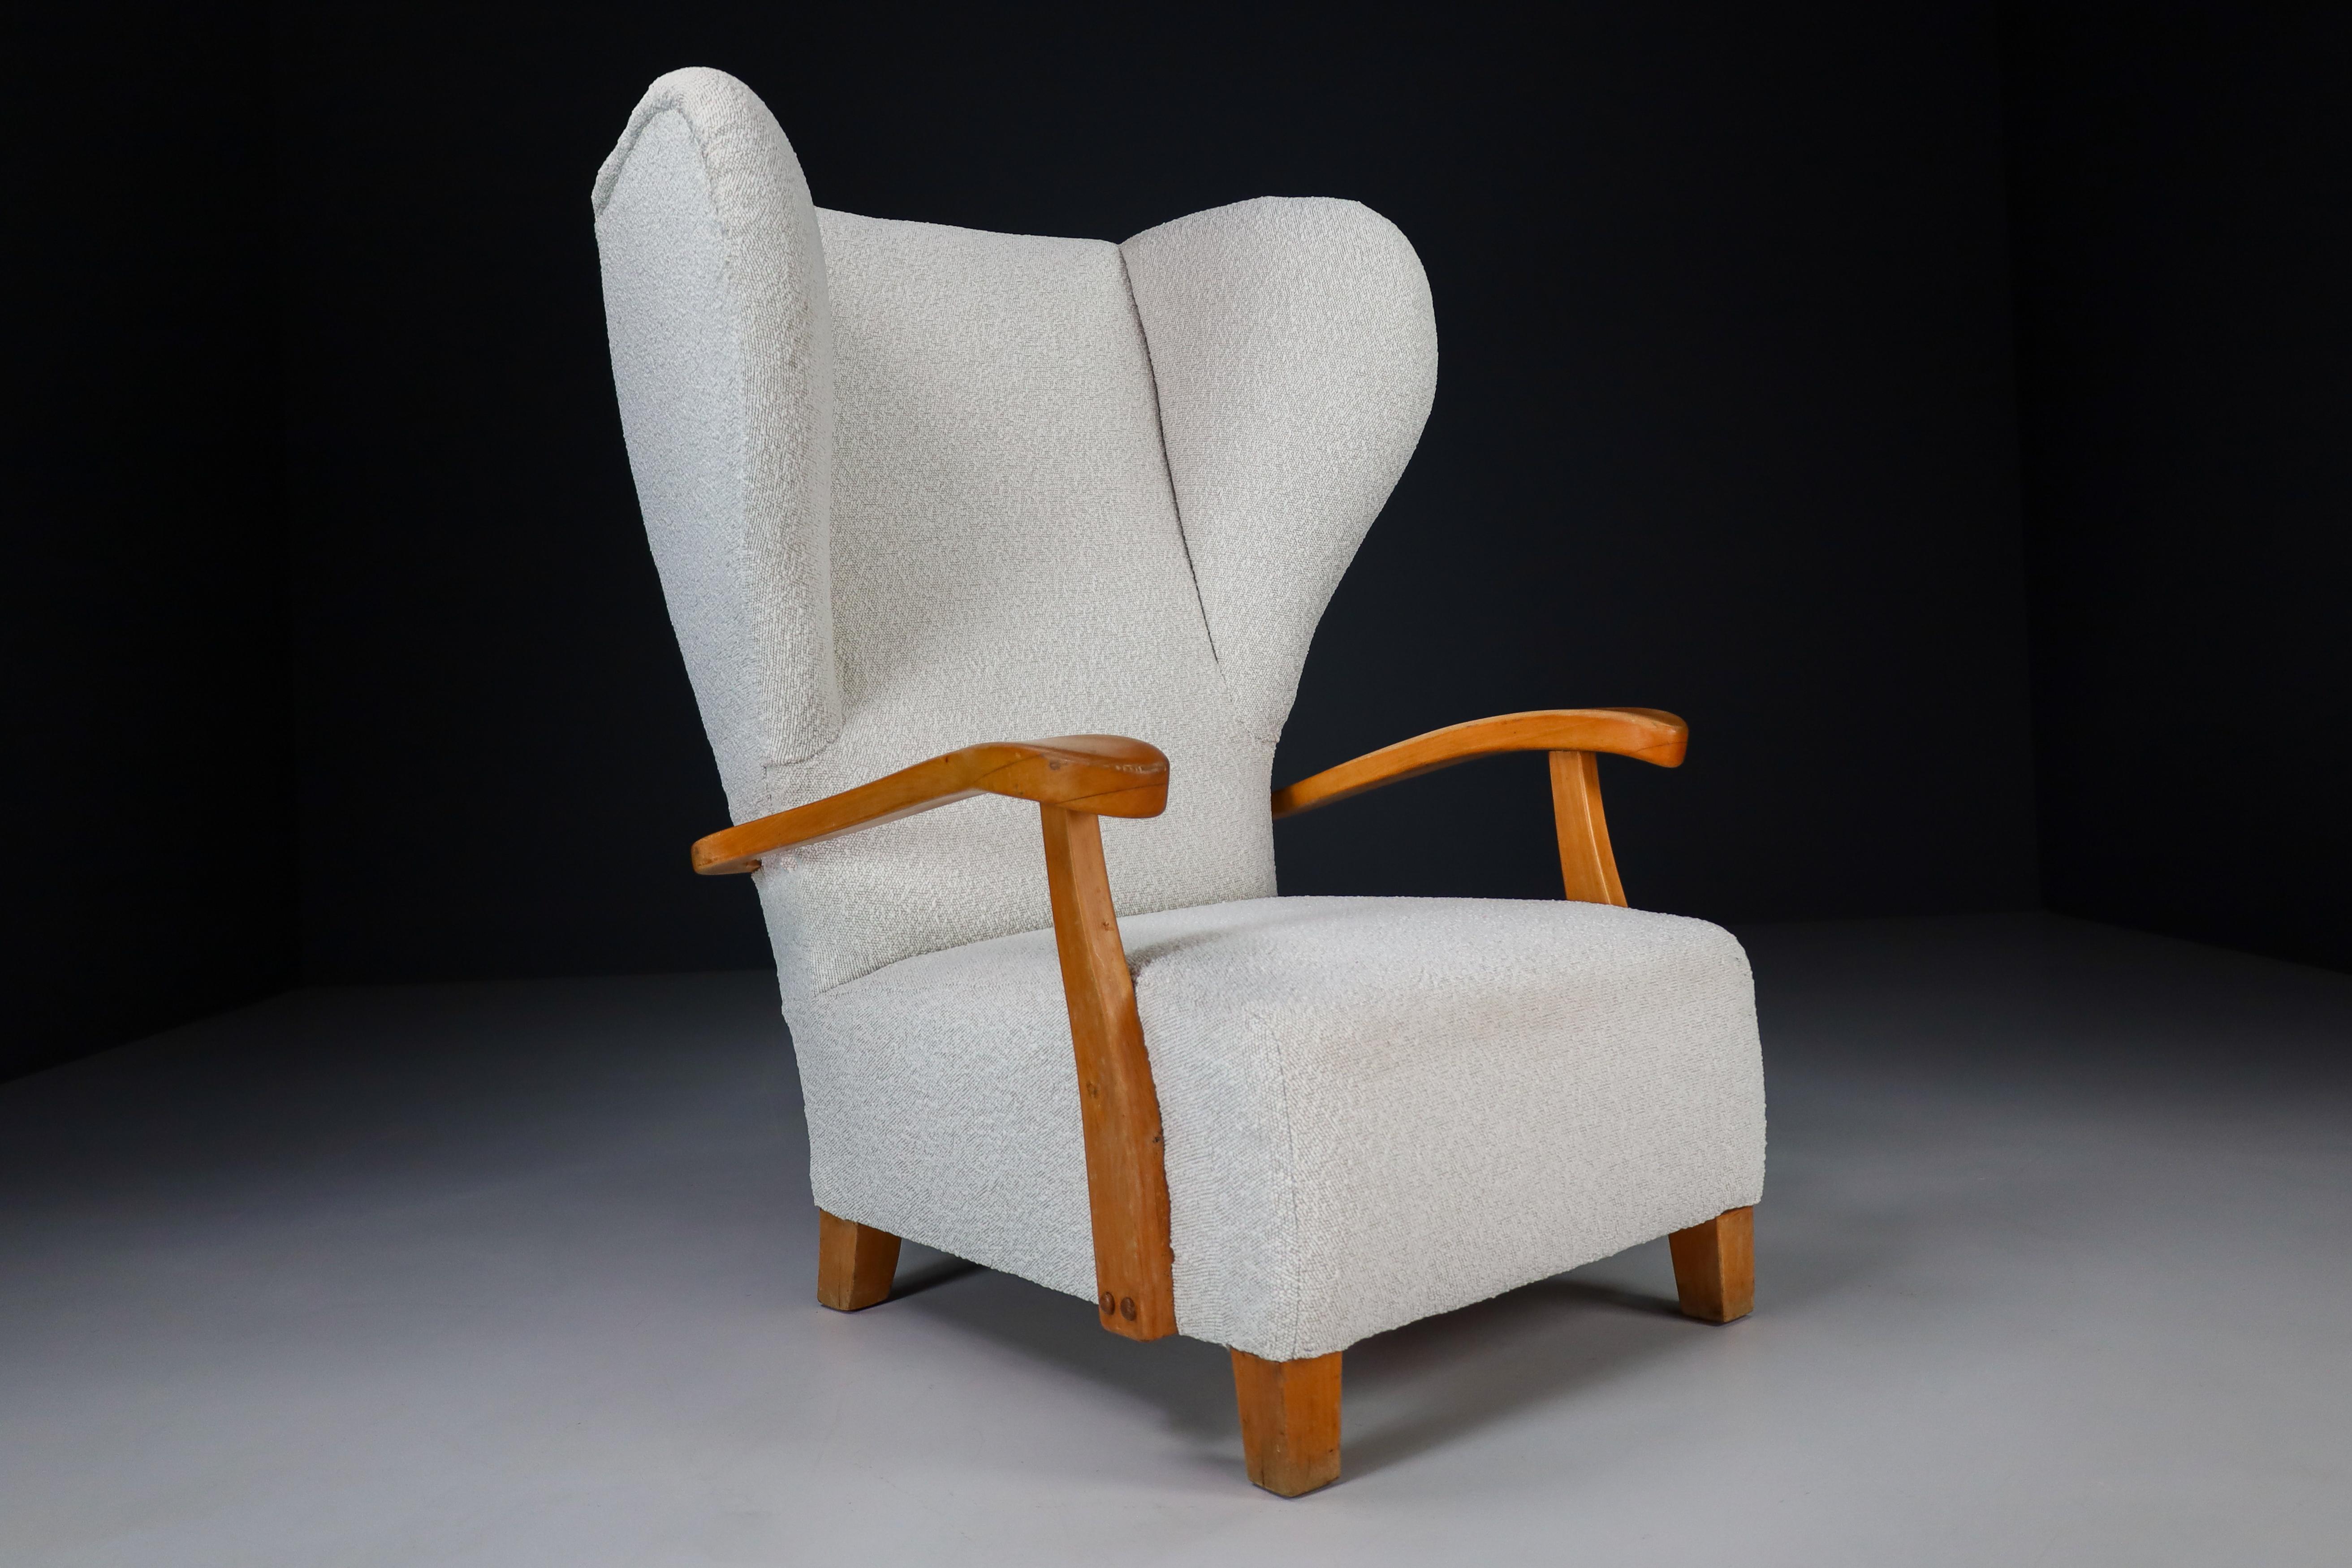 XXL Monumental Wingback Armchair in Walnut and Bouclé Fabric, France 1930s For Sale 6